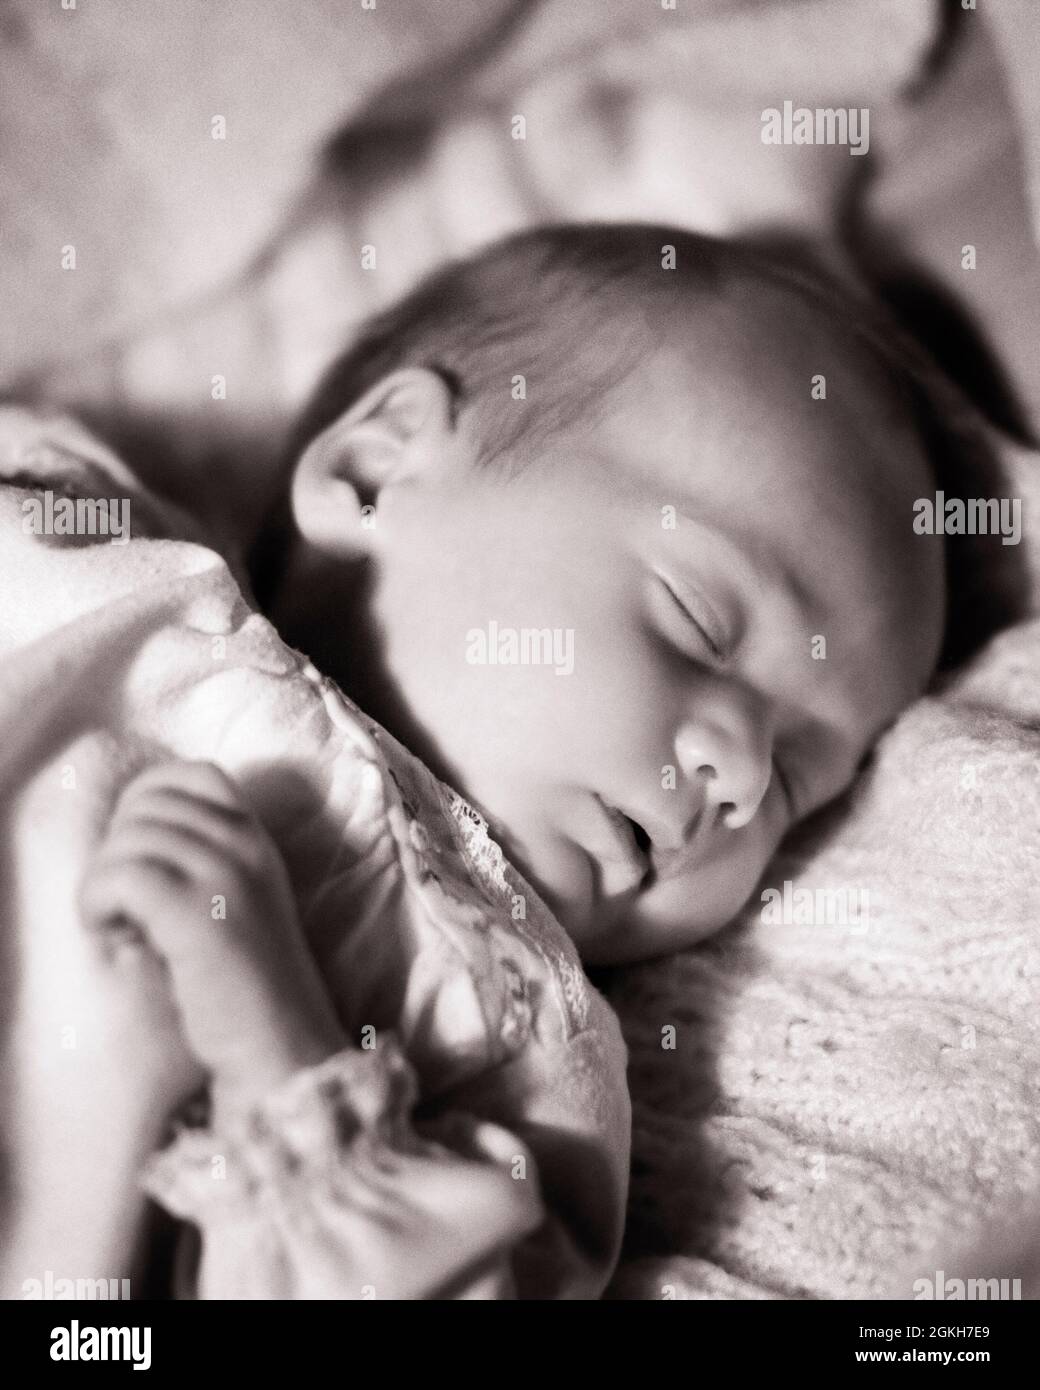 1970s SIX WEEK OLD BABY BOY SLEEPING PEACEFULLY - b24502 HAR001 HARS JUVENILES RELAXATION WEEK BLACK AND WHITE CAUCASIAN ETHNICITY HAR001 OLD FASHIONED Stock Photo